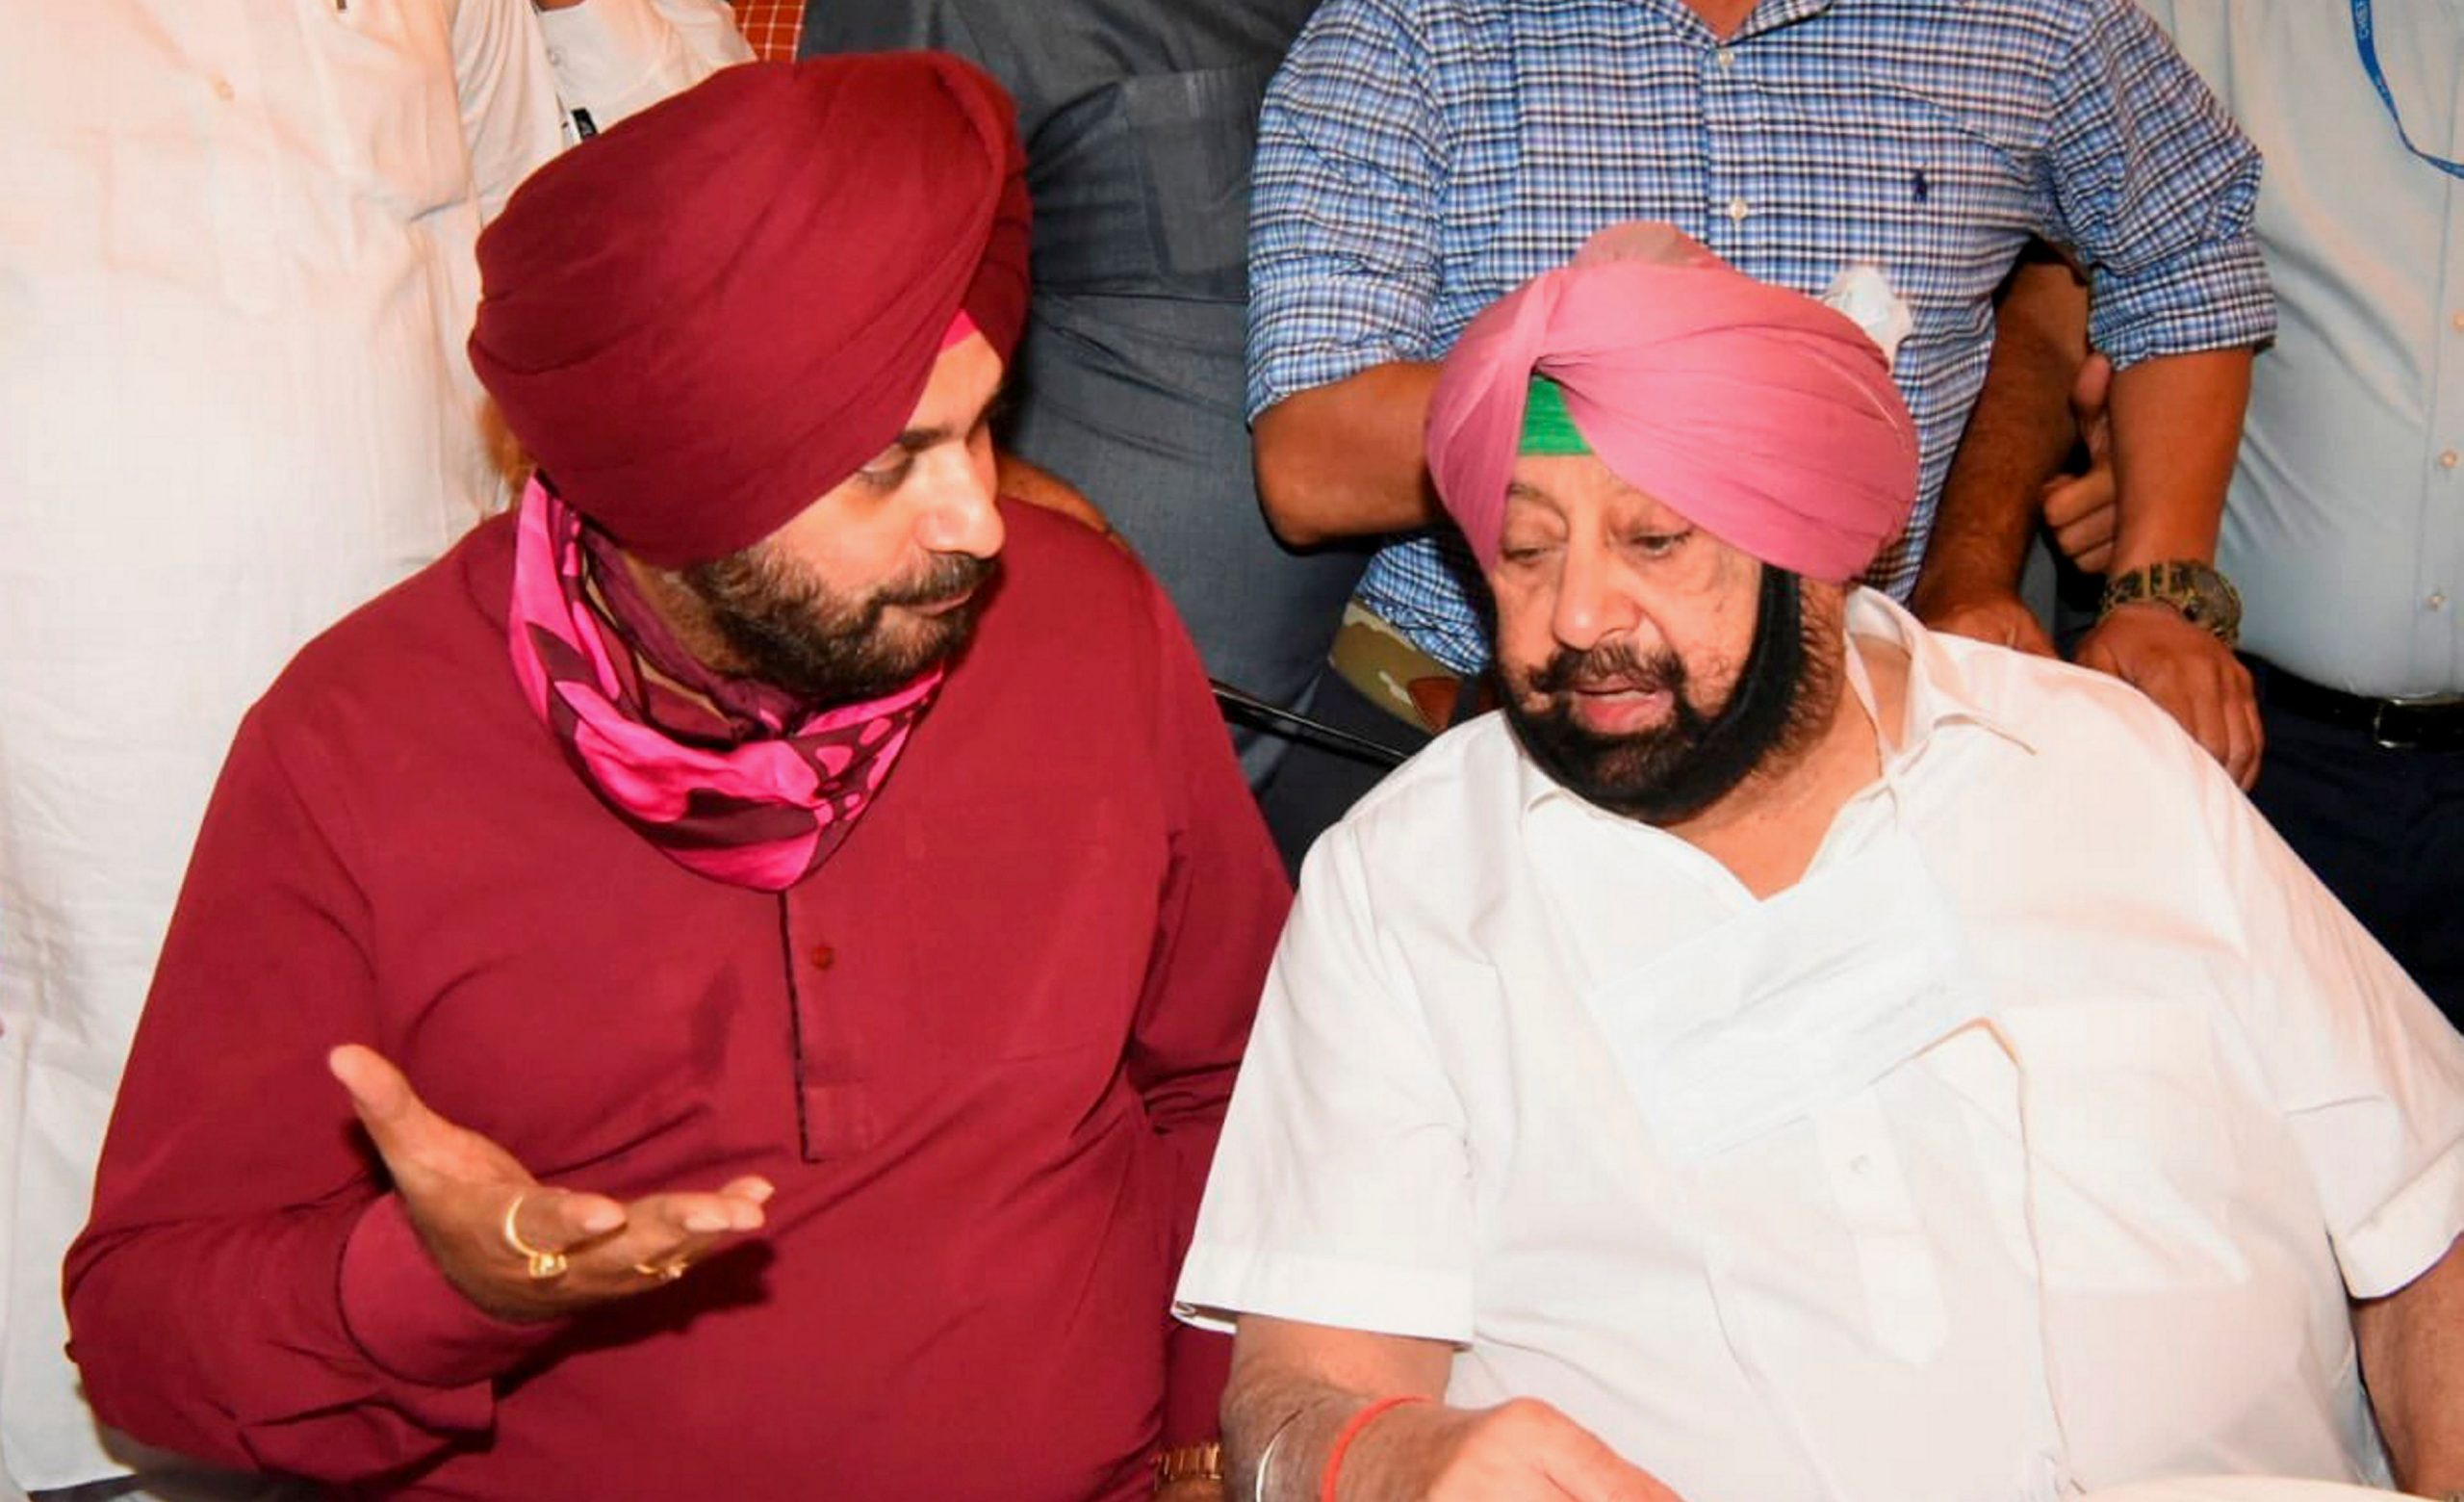 Temporary truce? Behind Sidhu and Amarinder Singh’s ‘all is well’ gesture